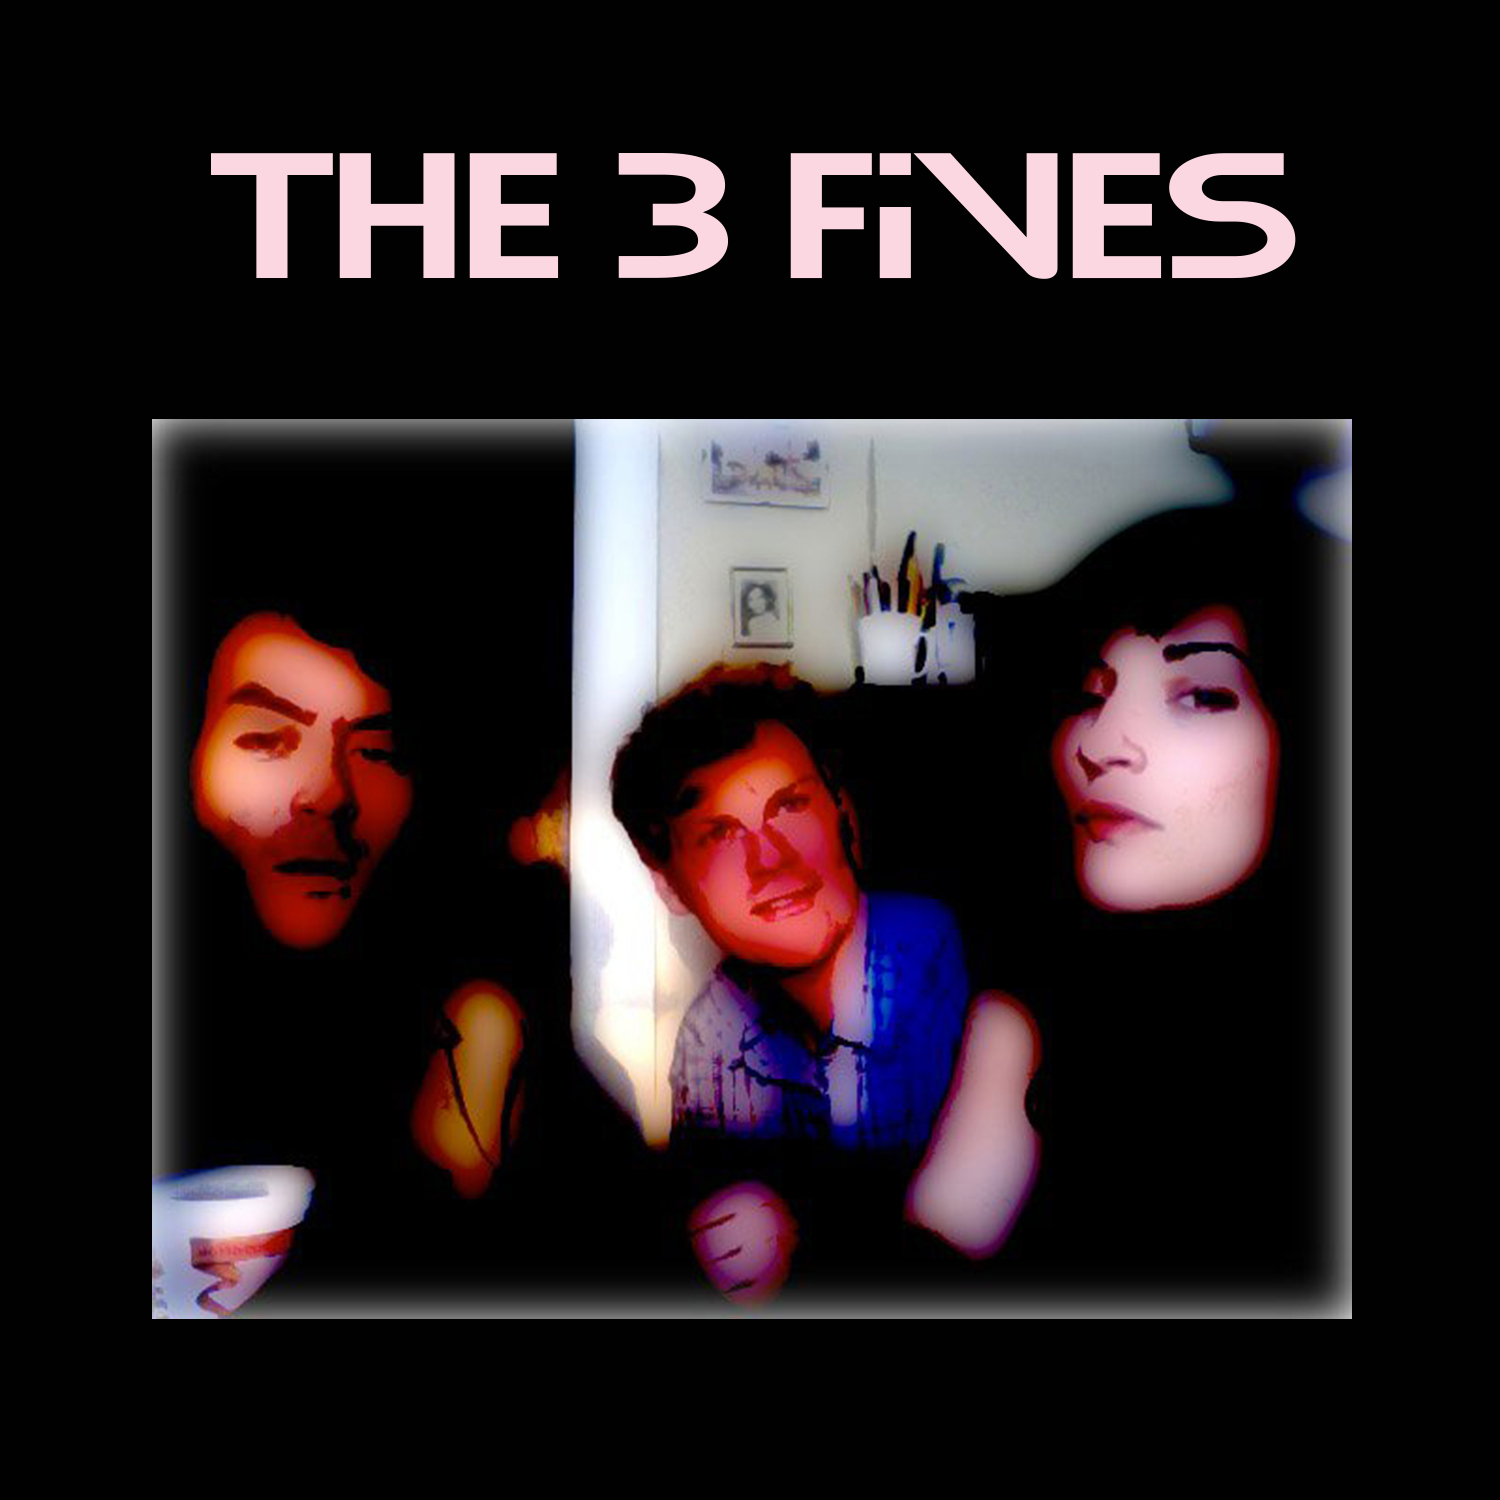 The 3 Fives03